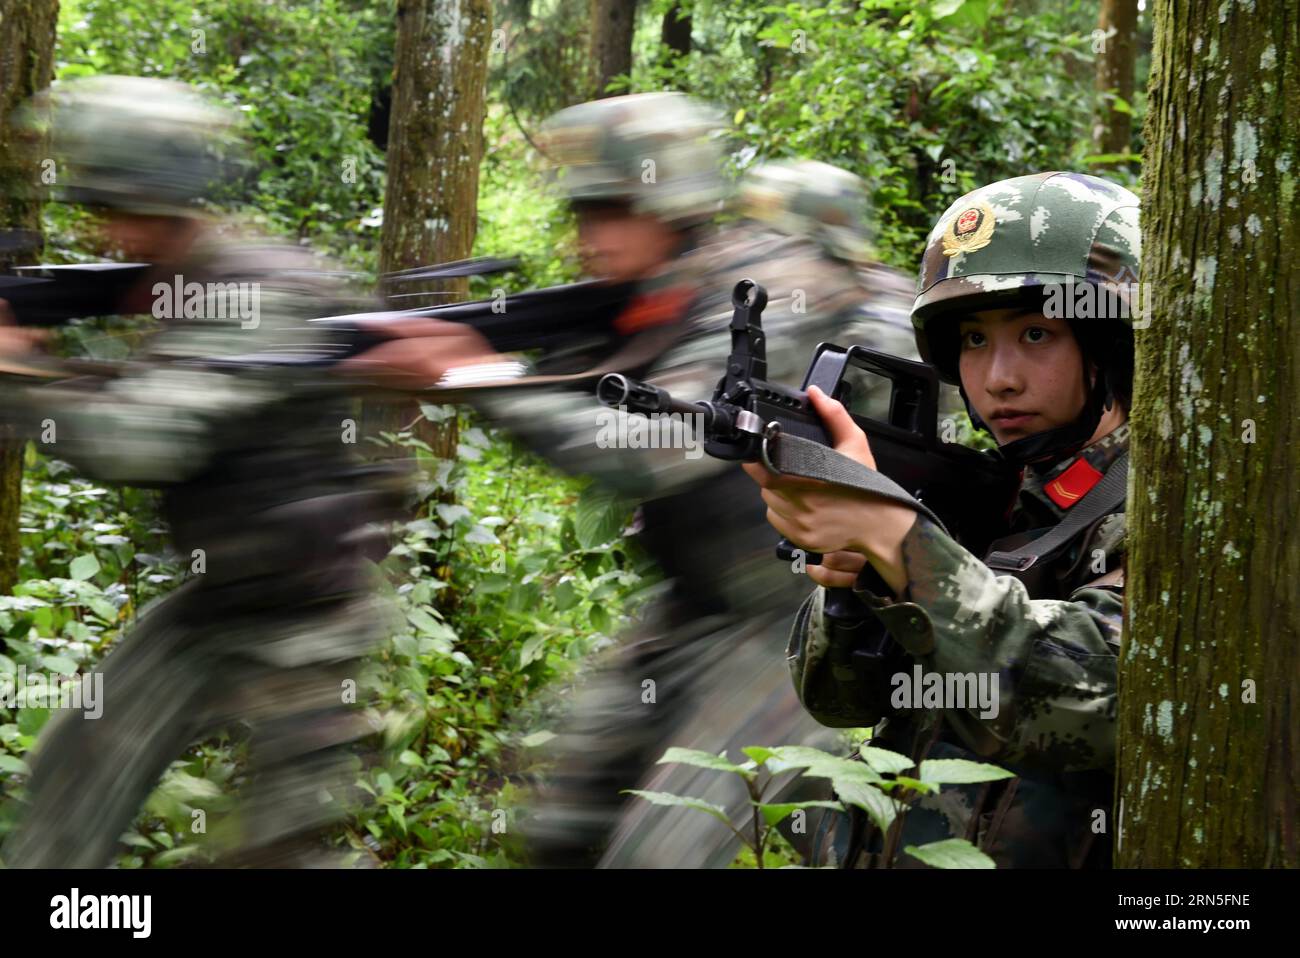 DEHONG, June 24, 2015 -- Zhang Liu takes part in a drilling in the jungle at the border area near Myanmar in Dehong Dai-Jingpo Autonomous Prefecture, southwest China s Yunnan Province, June 24, 2015. Born in 1995, Zhang Liu became an anti-drug soldier in border checkpoint of Mukang in 2013. Grown up in an affluent family in central China s Hunan Province, Zhang said that being a soldier had always been her dream, which drove her to join the army after graduating from high school. Being a front line anti-drug force, the border checkpoint of Mukang has captured about 100 kilograms of drugs since Stock Photo